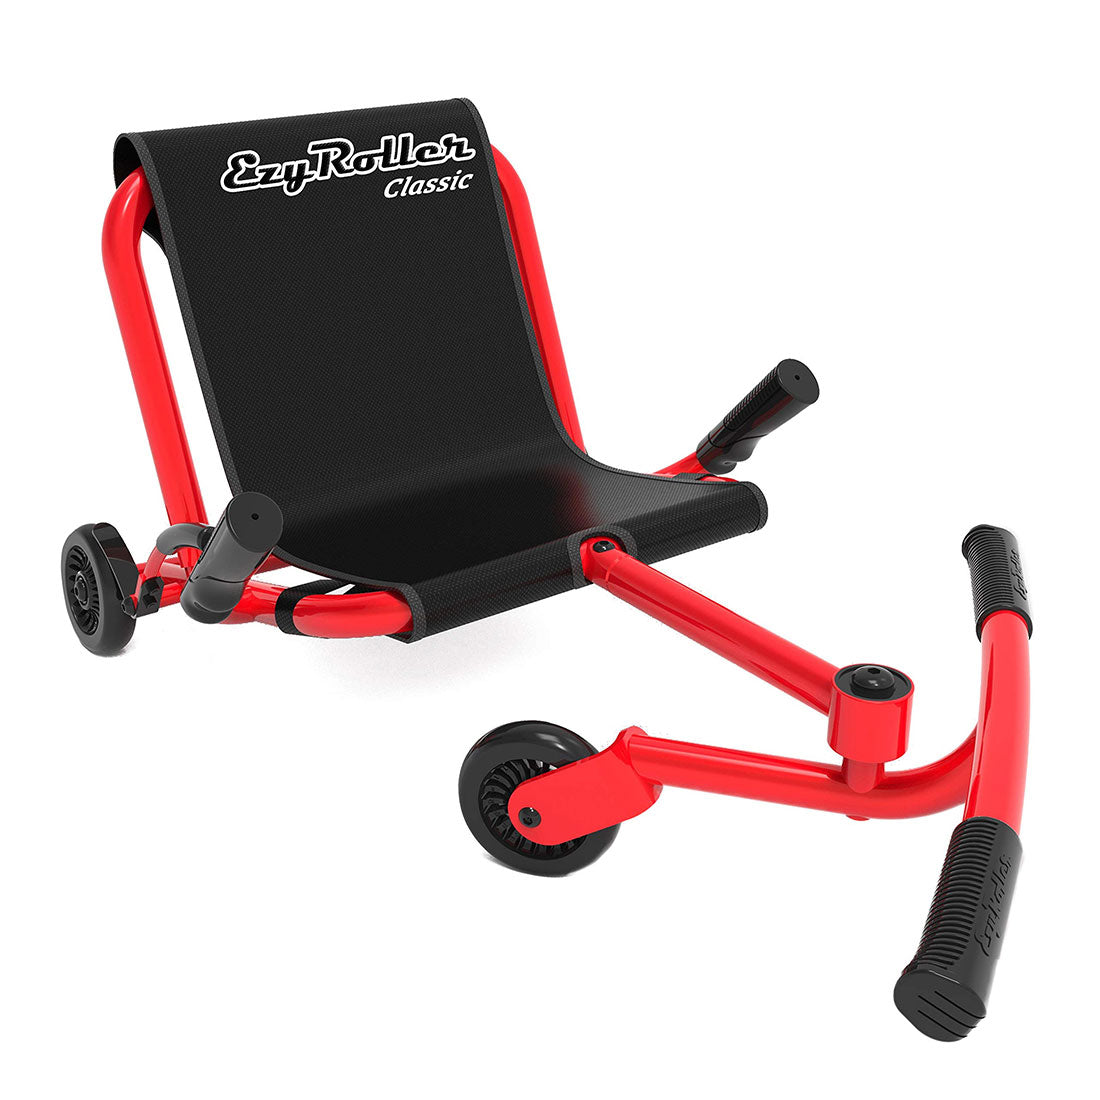 EzyRoller Classic - Red Other Fun Toys